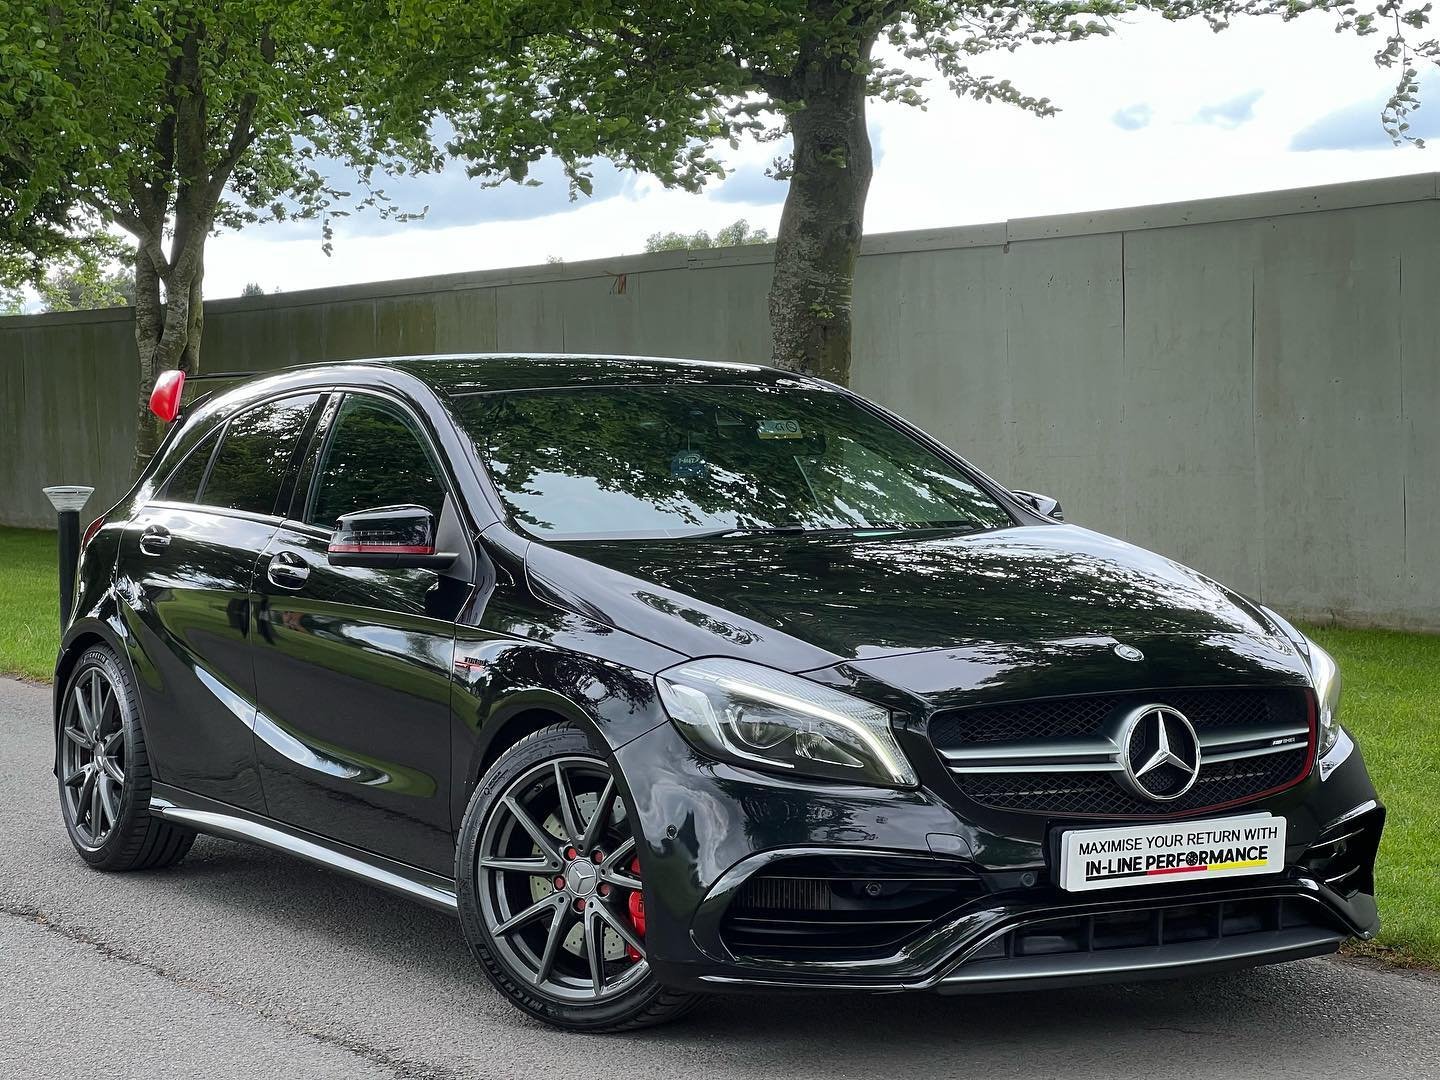 Here At IN-LINE PERFORMANCE We Take Pride And Joy Into Supplying You With The Best Of Performance Engineering . We Are Proud To Present To You This 2016  Mercedes Benz A45  Finished In A Desirable Metallic Black  With AMG Black Leather Interior.

We 